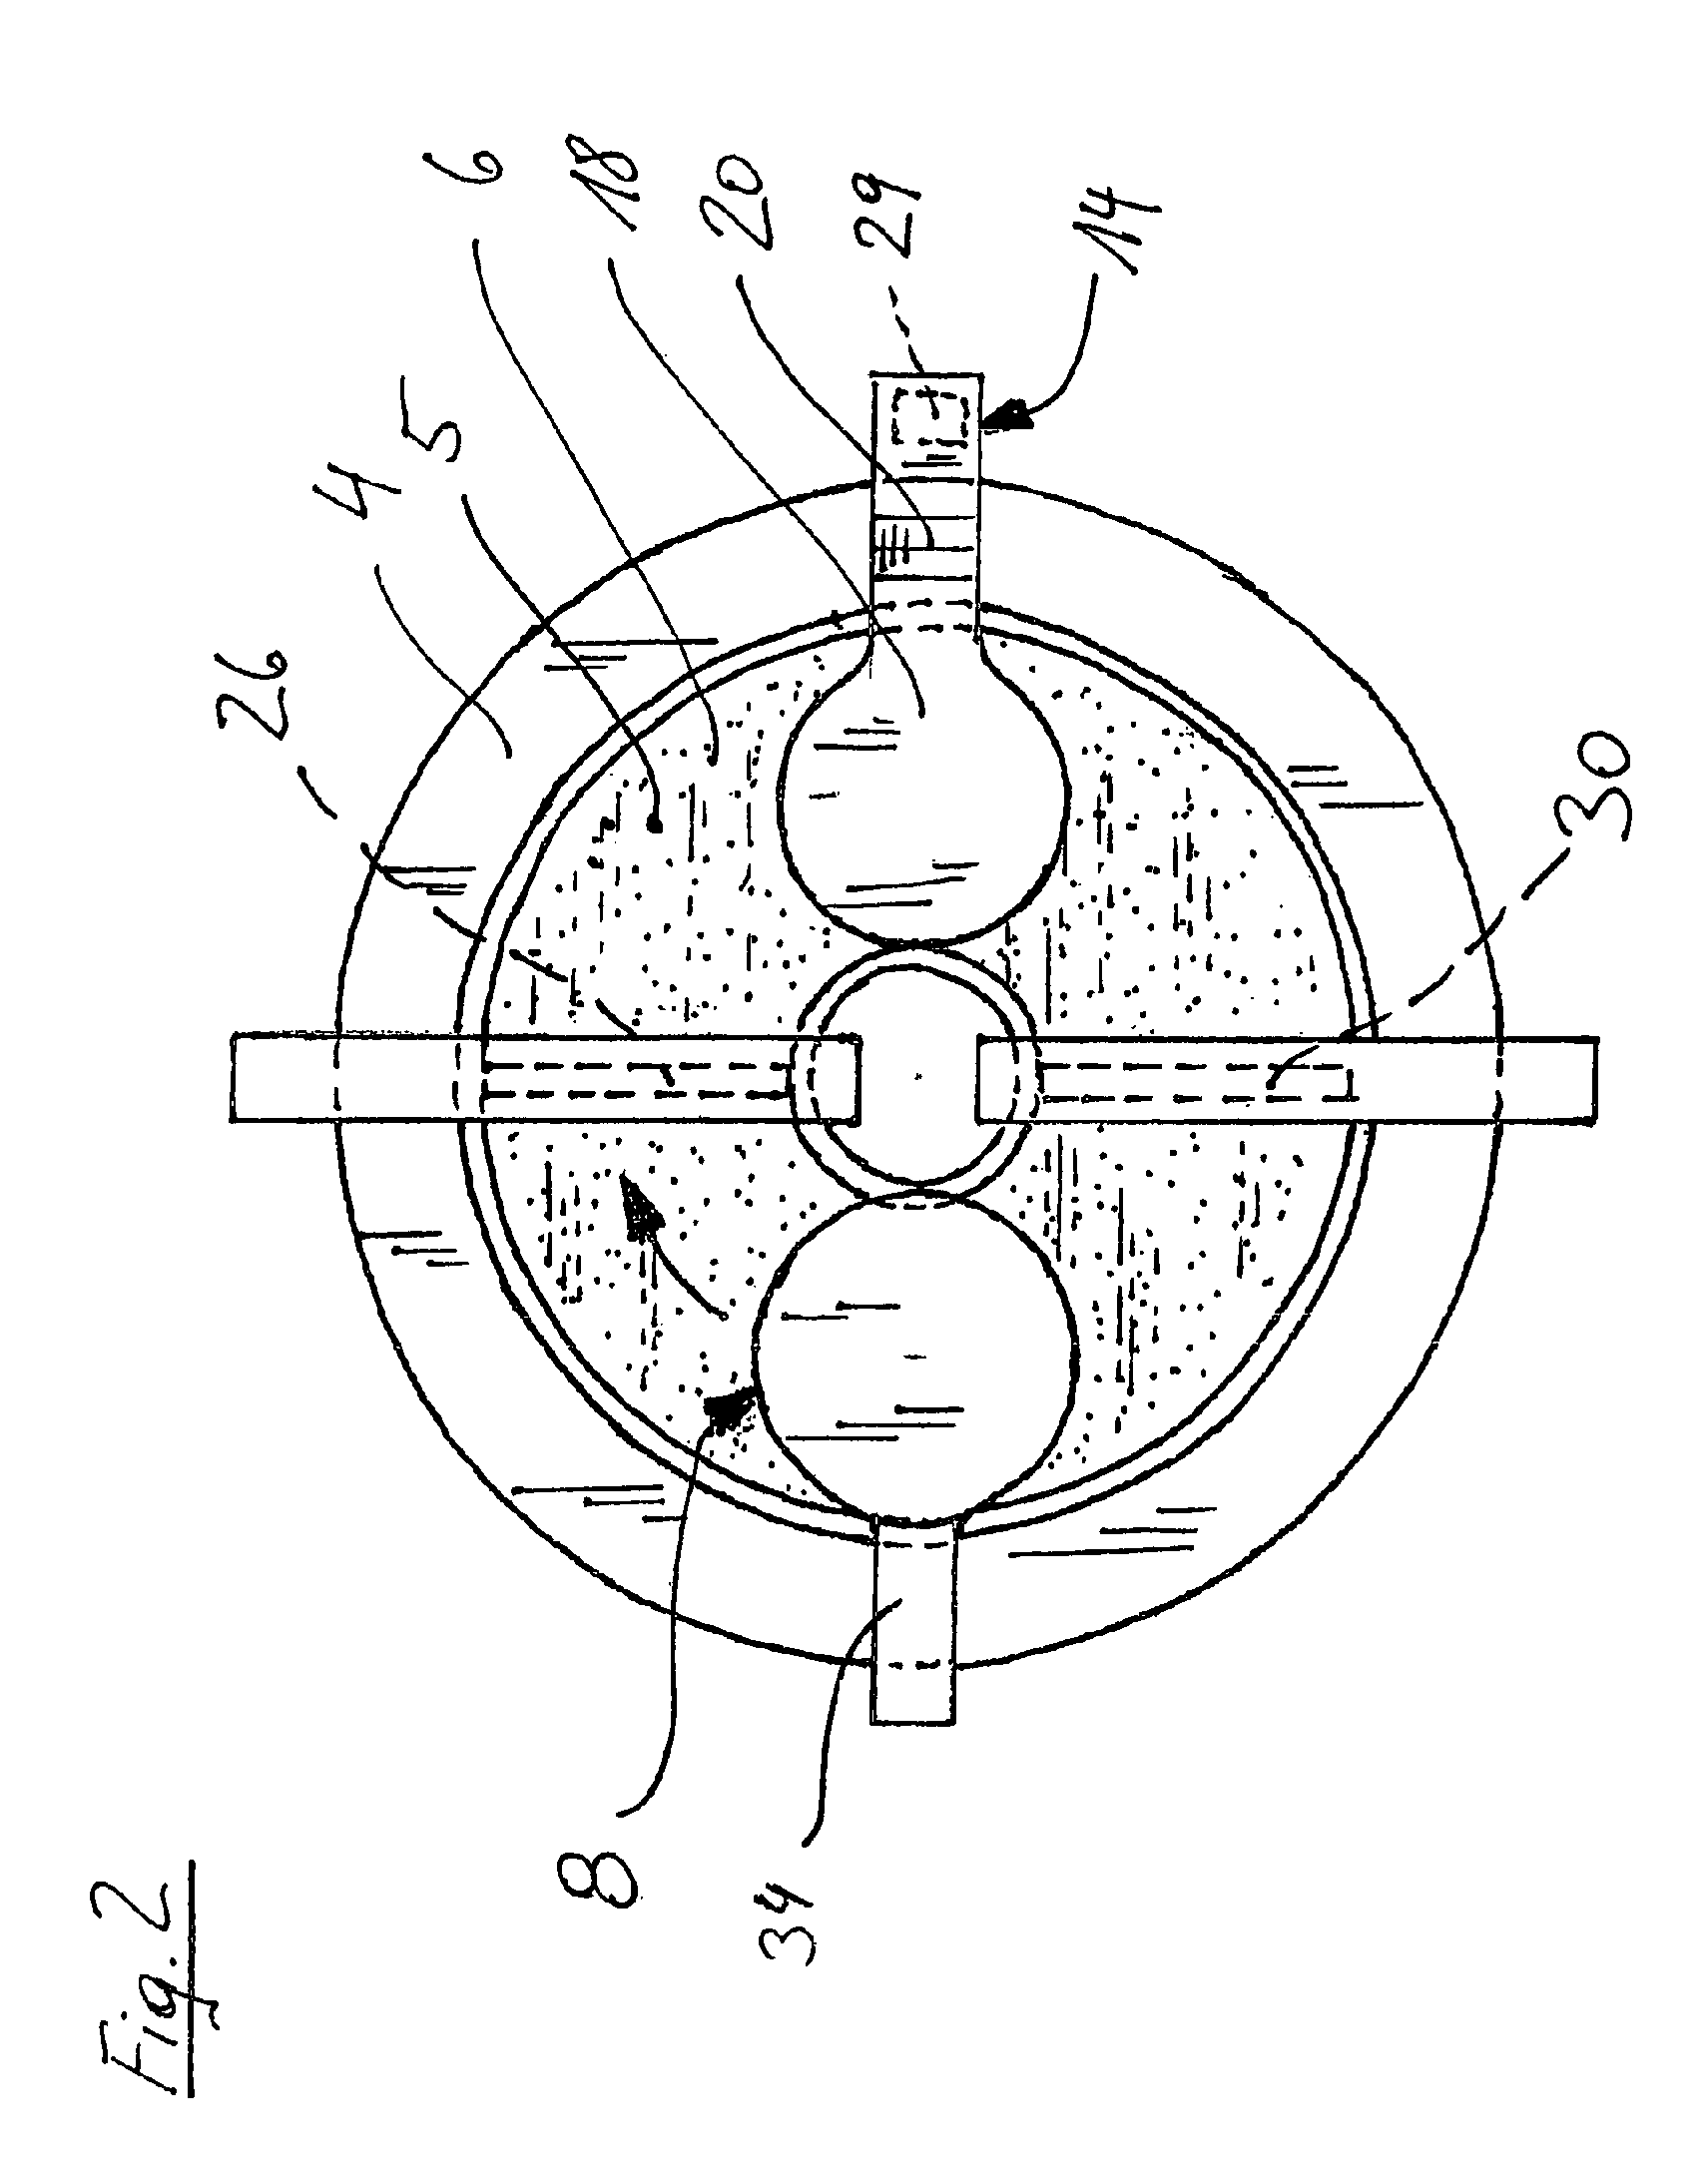 Device and method for processing light-polymerizable material for building up an object in layers